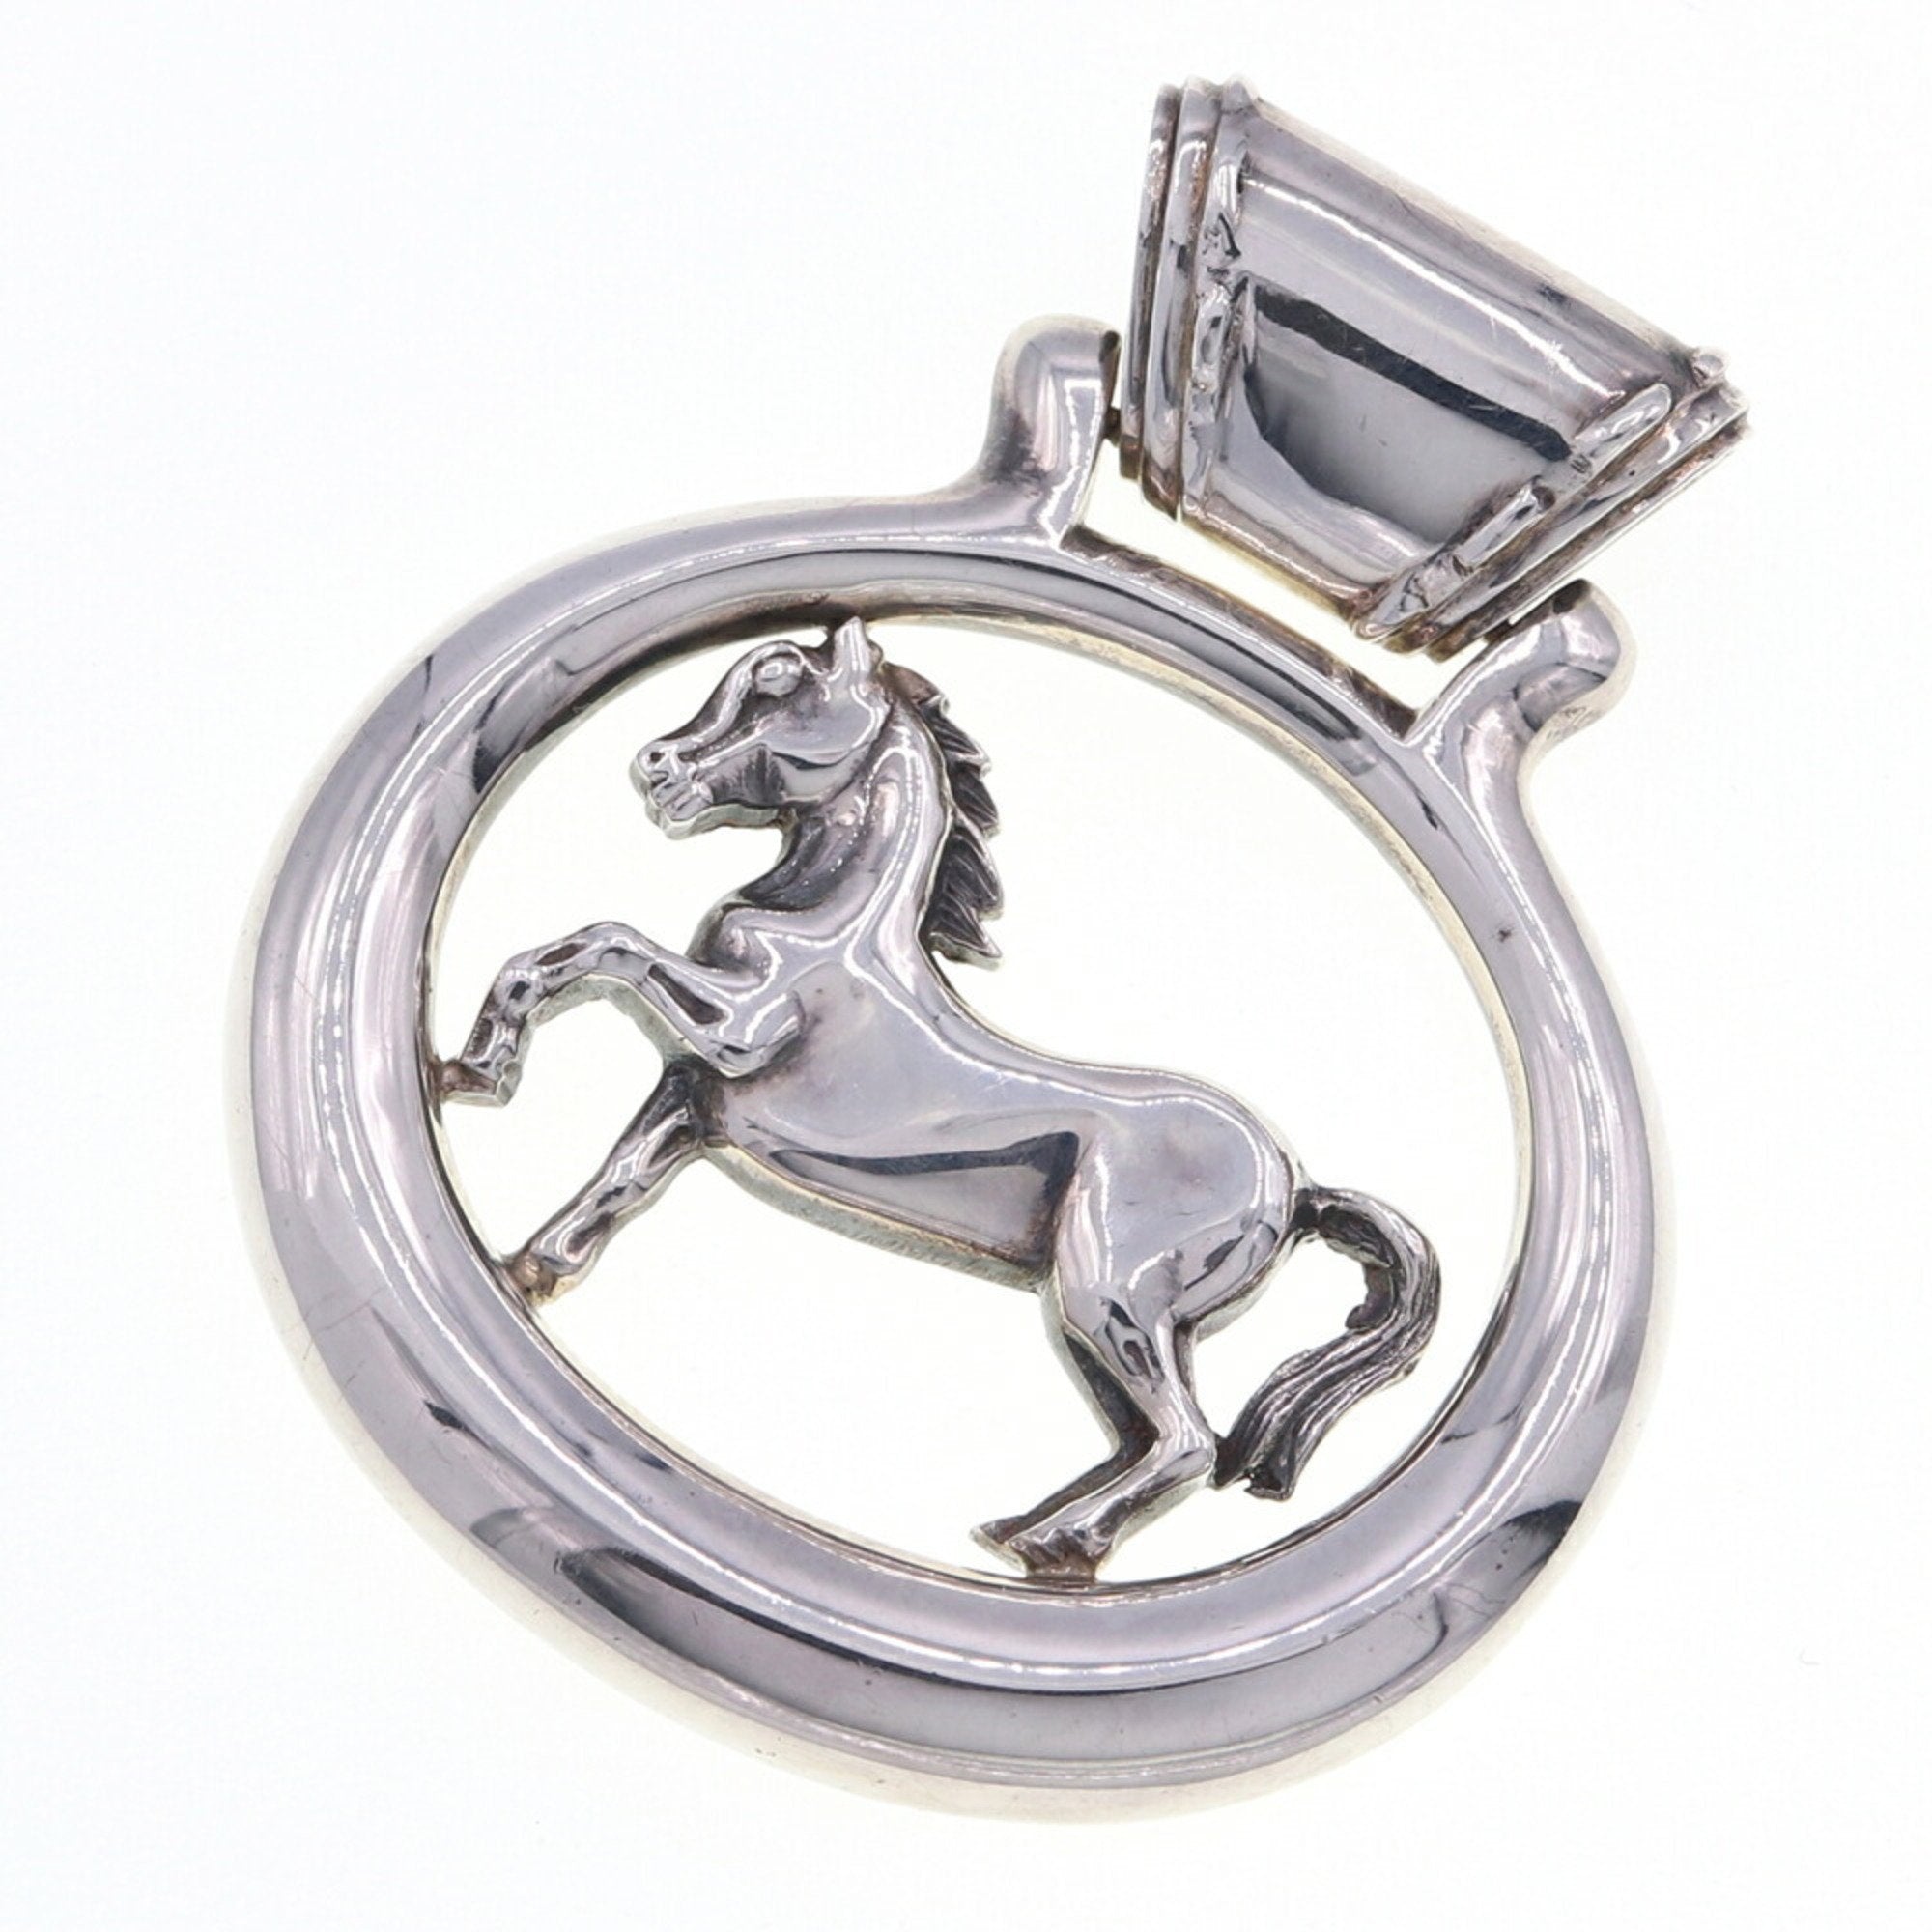 image of HERMES pendant top silver metal head necklace charm horse ladies